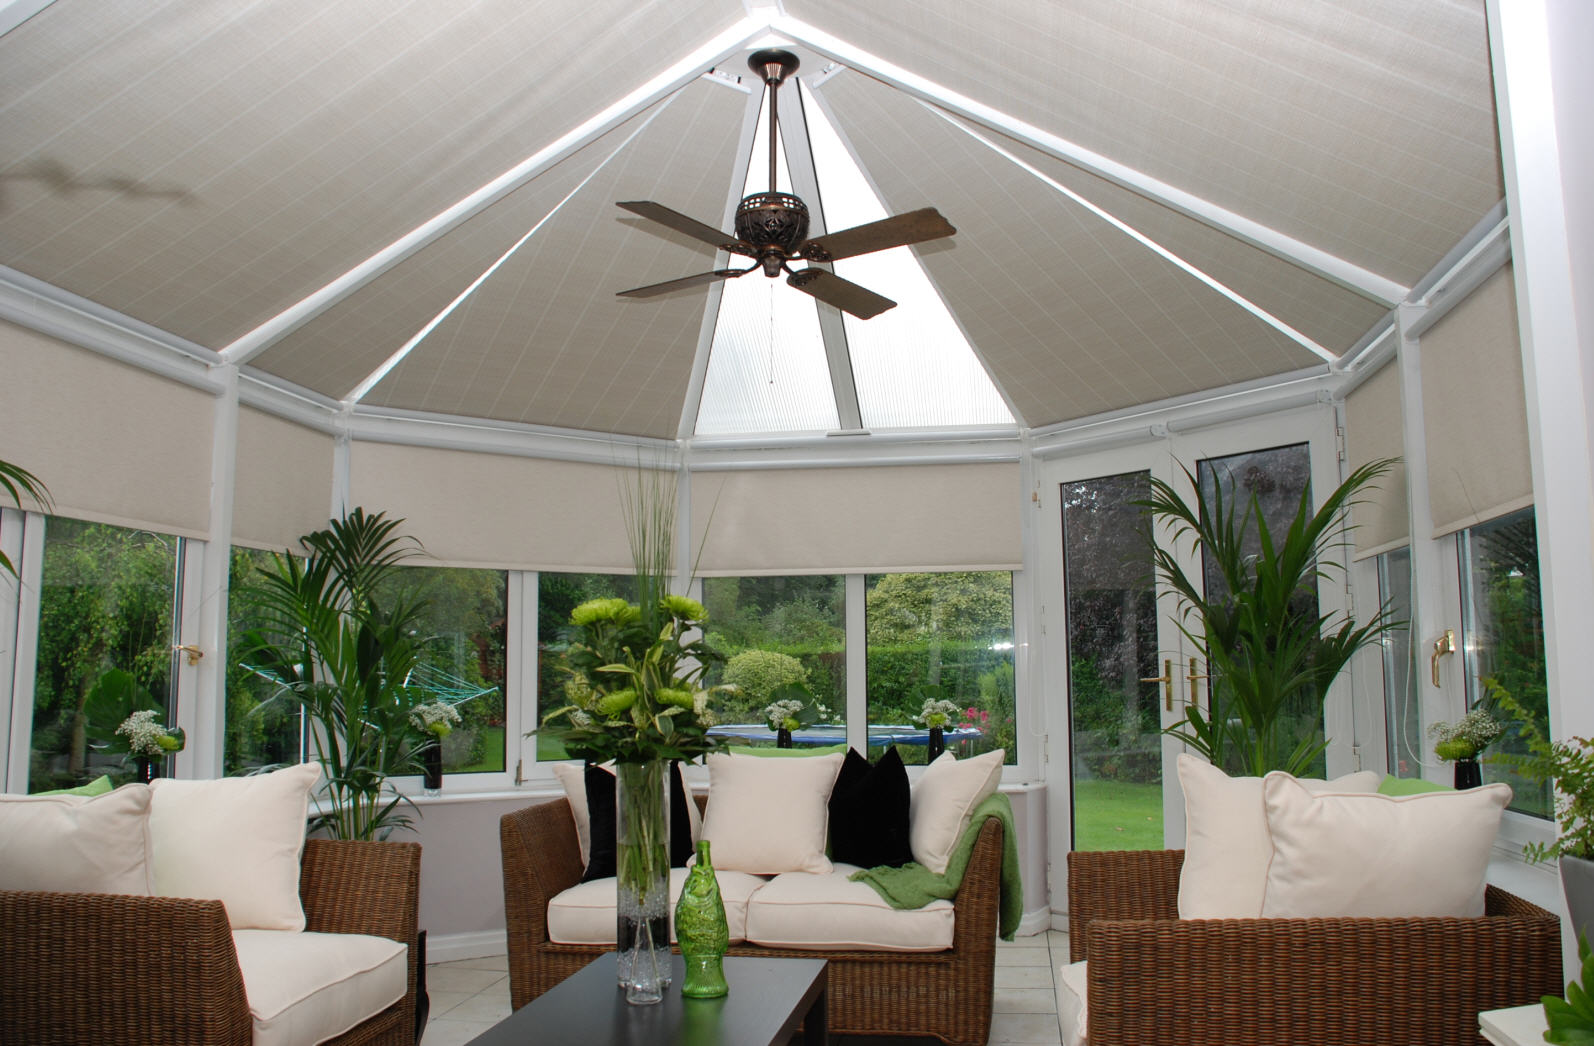 How To Buy The Best Conservatory Ceiling Fan